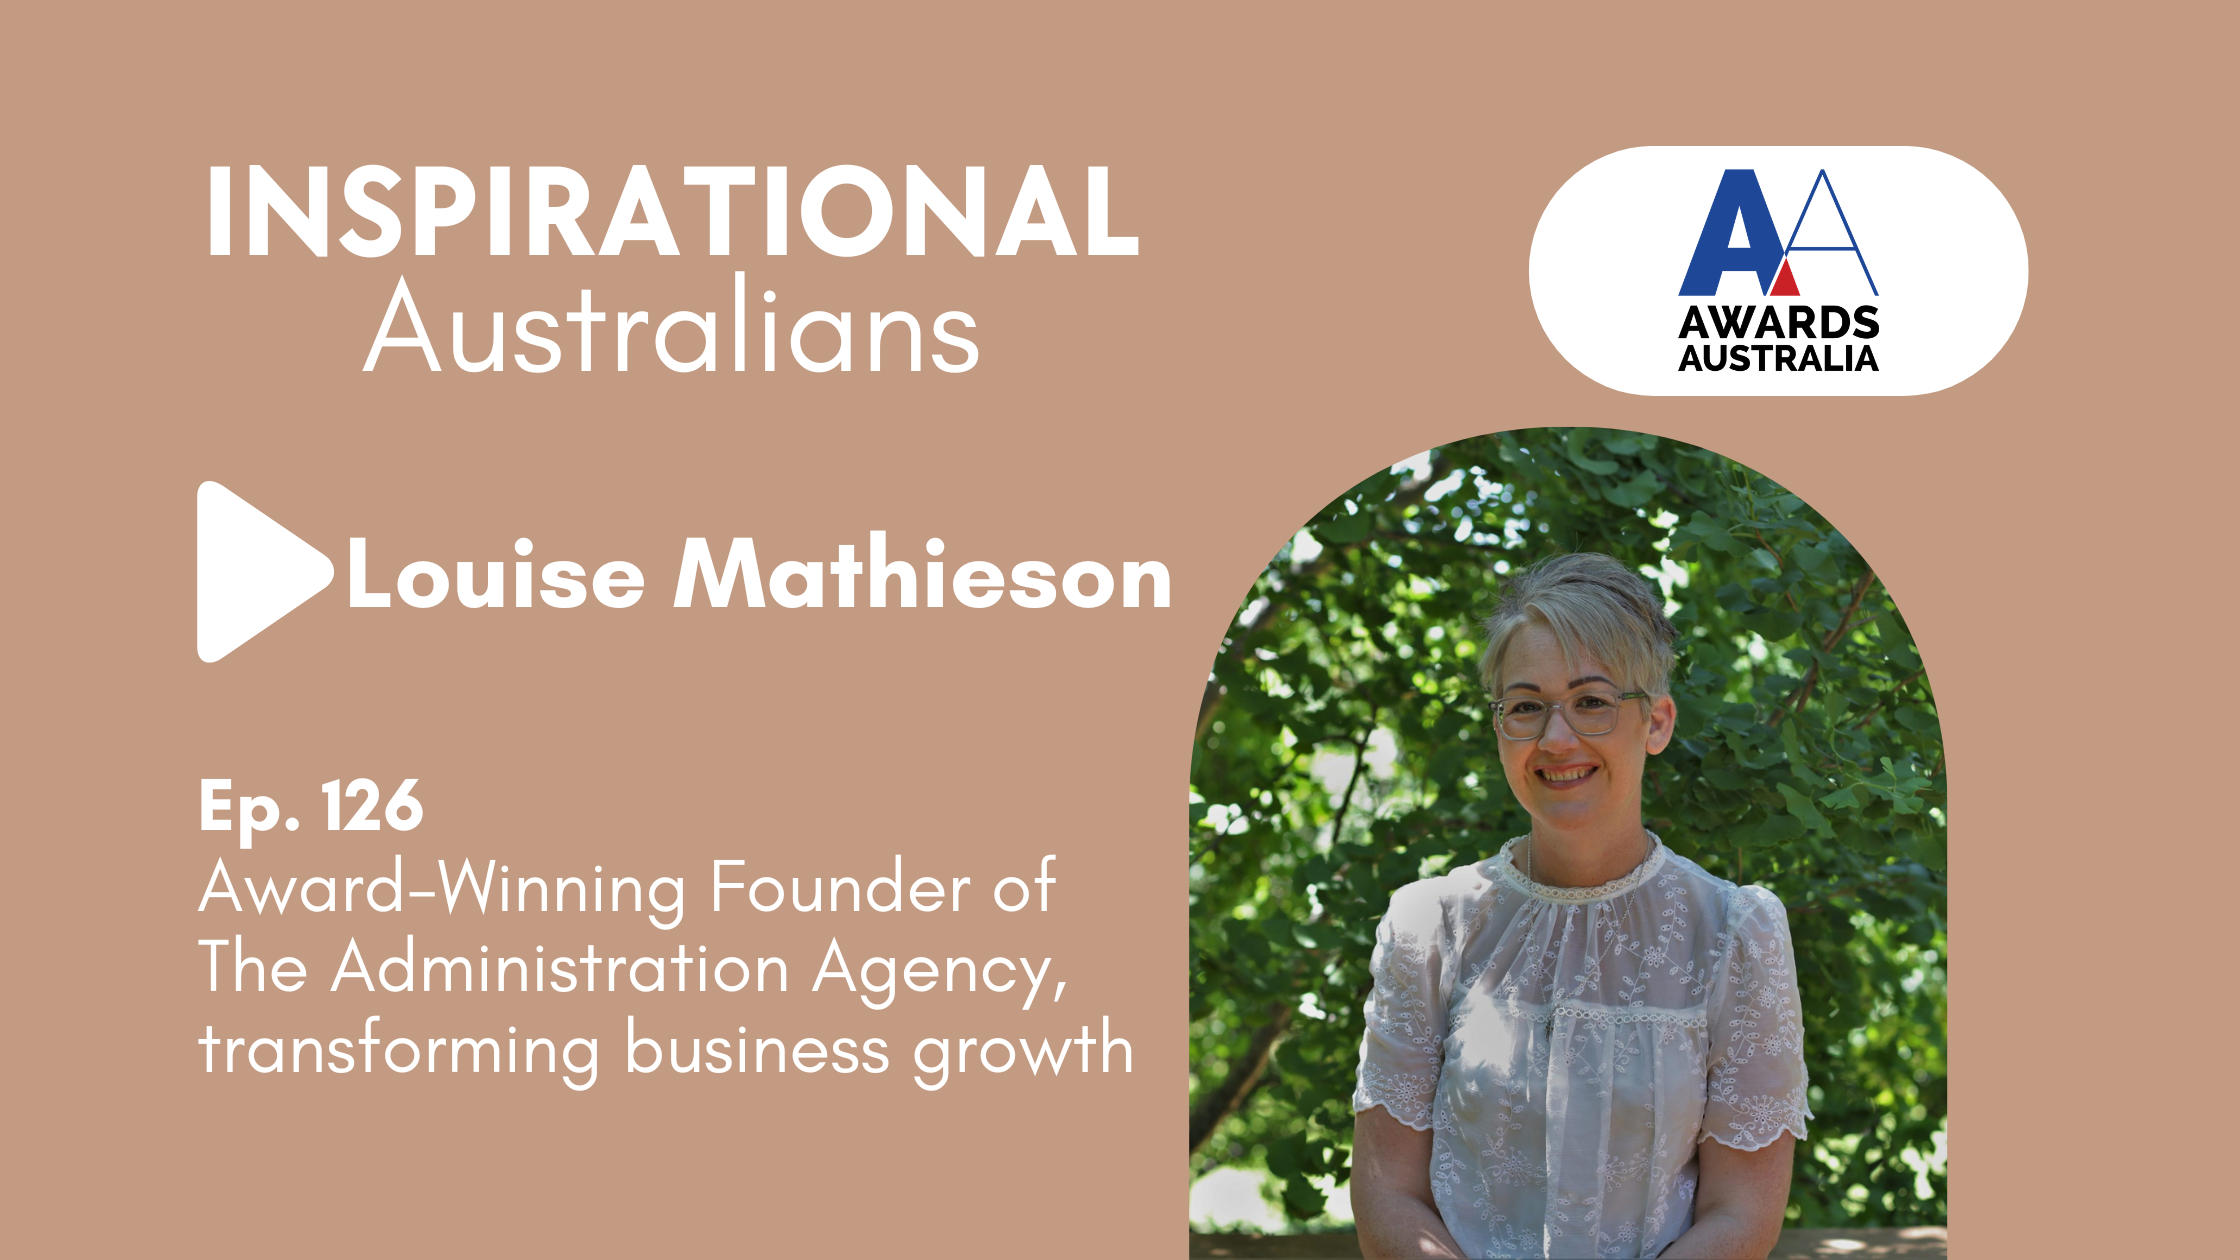 Louise Mathieson: Award-Winning Founder of The Administration Agency, transforming business growth